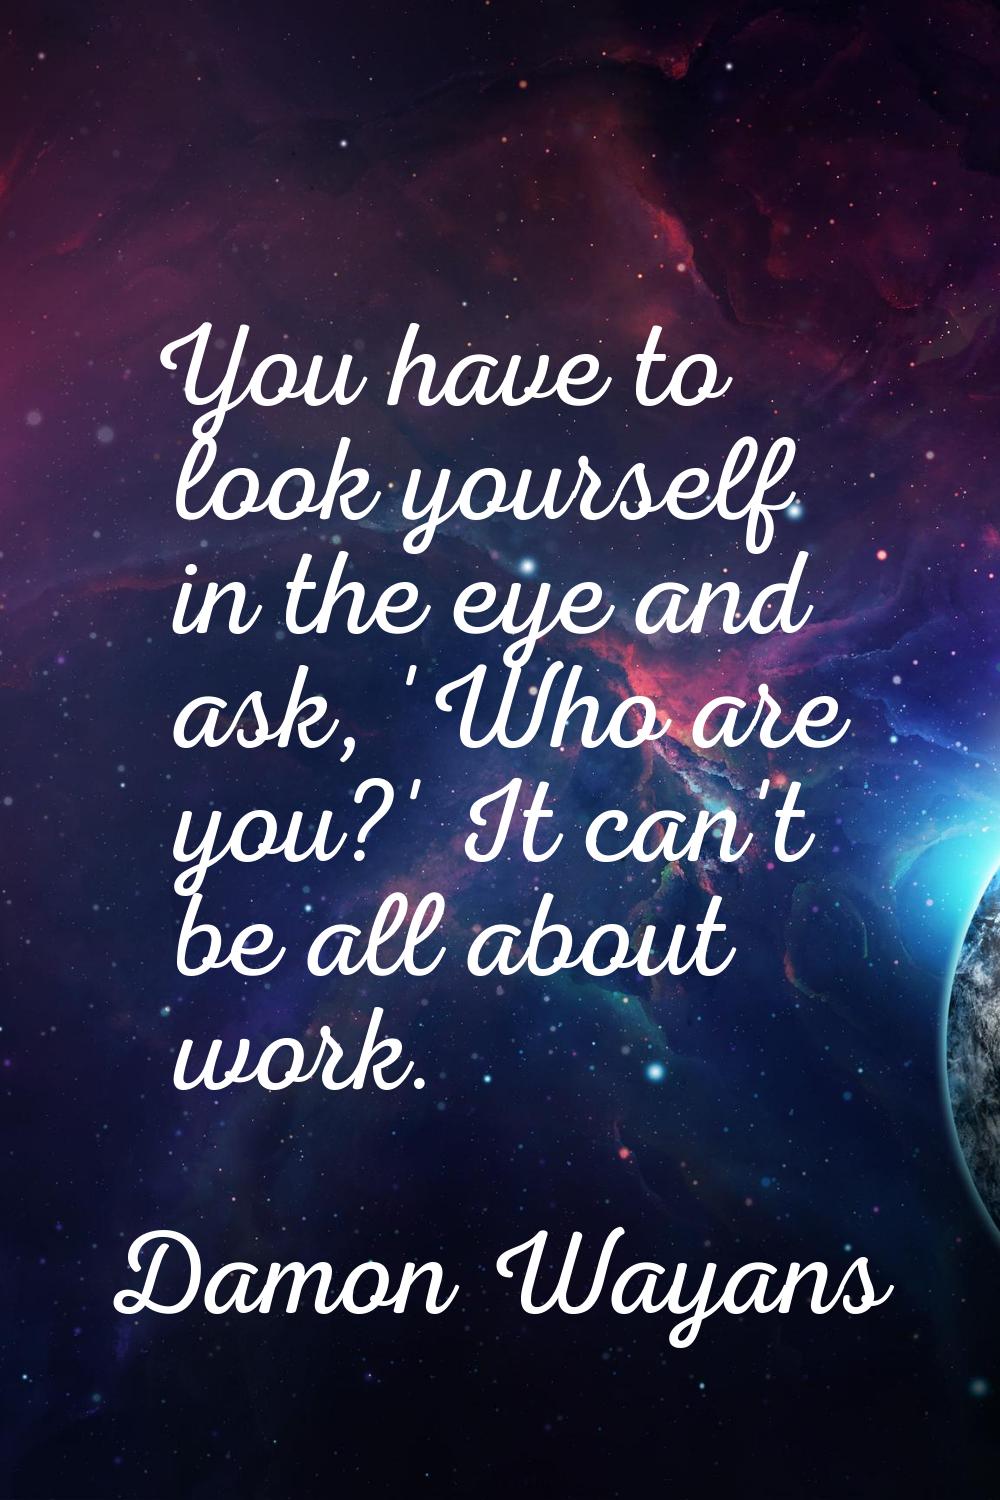 You have to look yourself in the eye and ask, 'Who are you?' It can't be all about work.